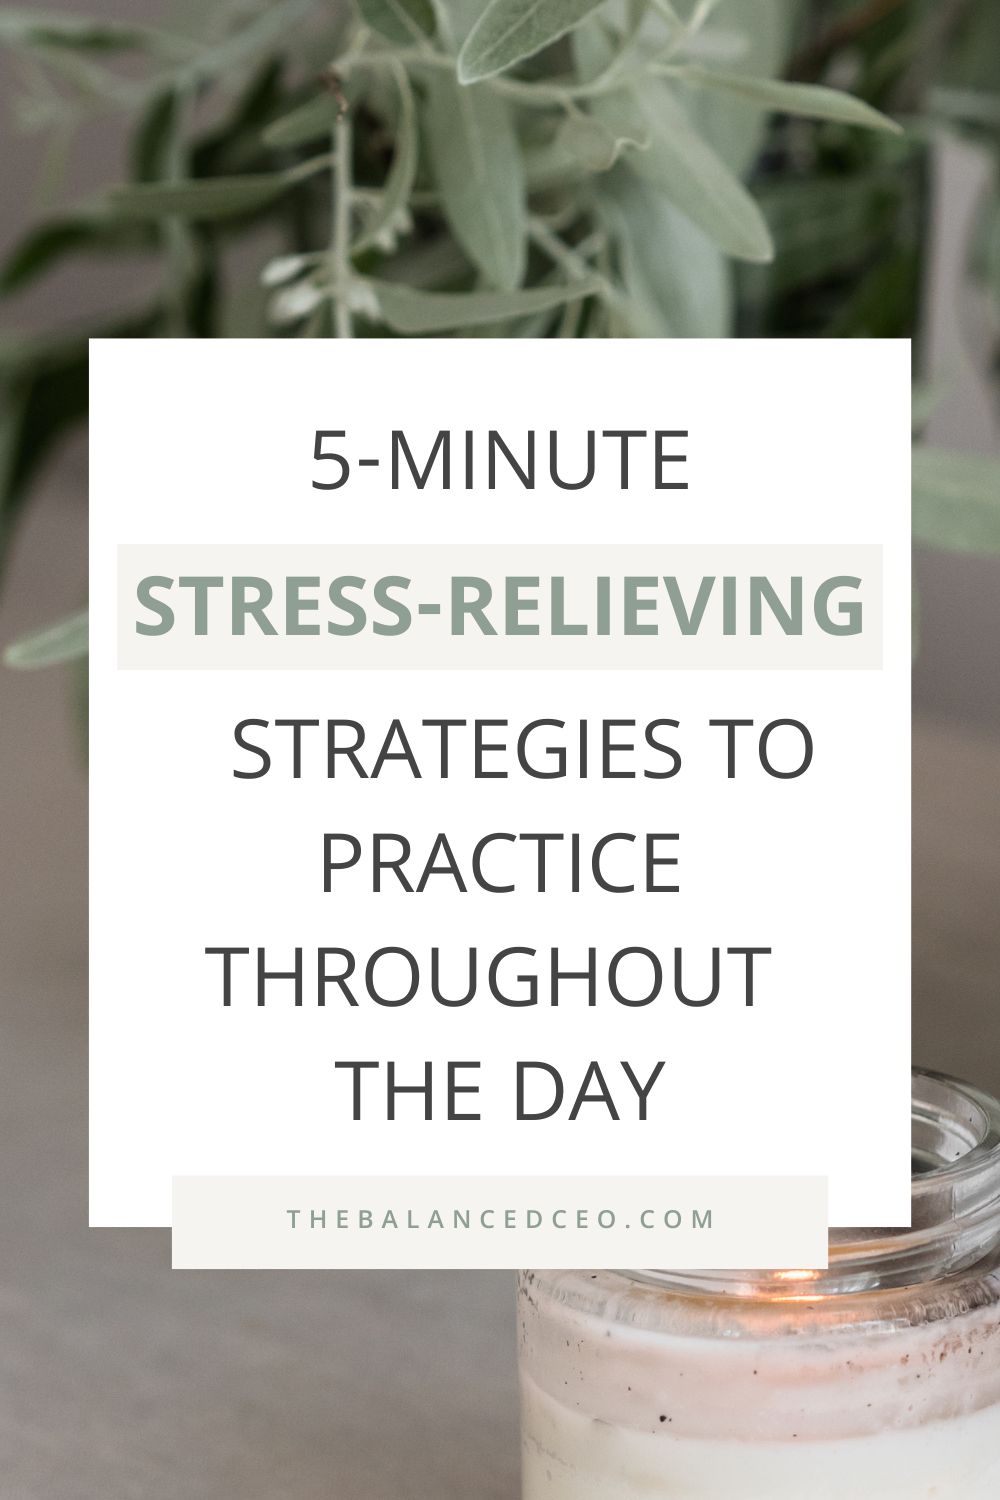 5-Minute Stress-Relieving Strategies to Practice Throughout the Day